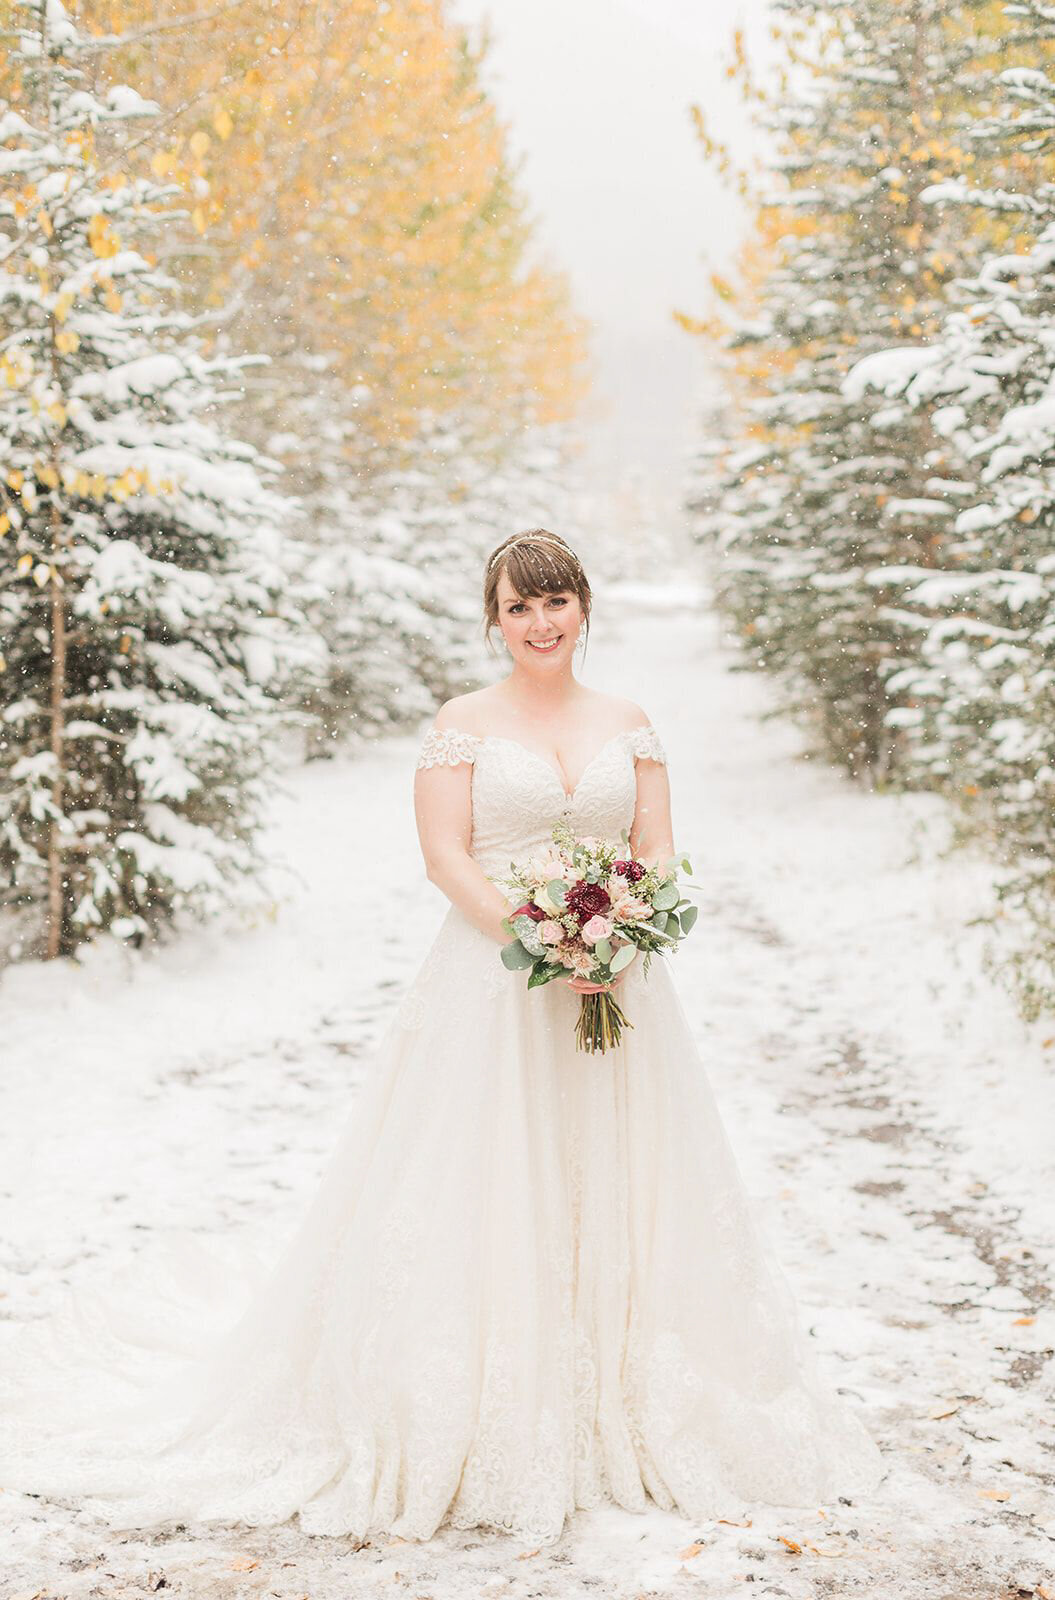 Stunning and romantic winter bridal portrait captured by Jennifer Chabot Photography, classic and romantic wedding photographer in Calgary,  Alberta. Featured on the Bronte Bride Vendor Guide.